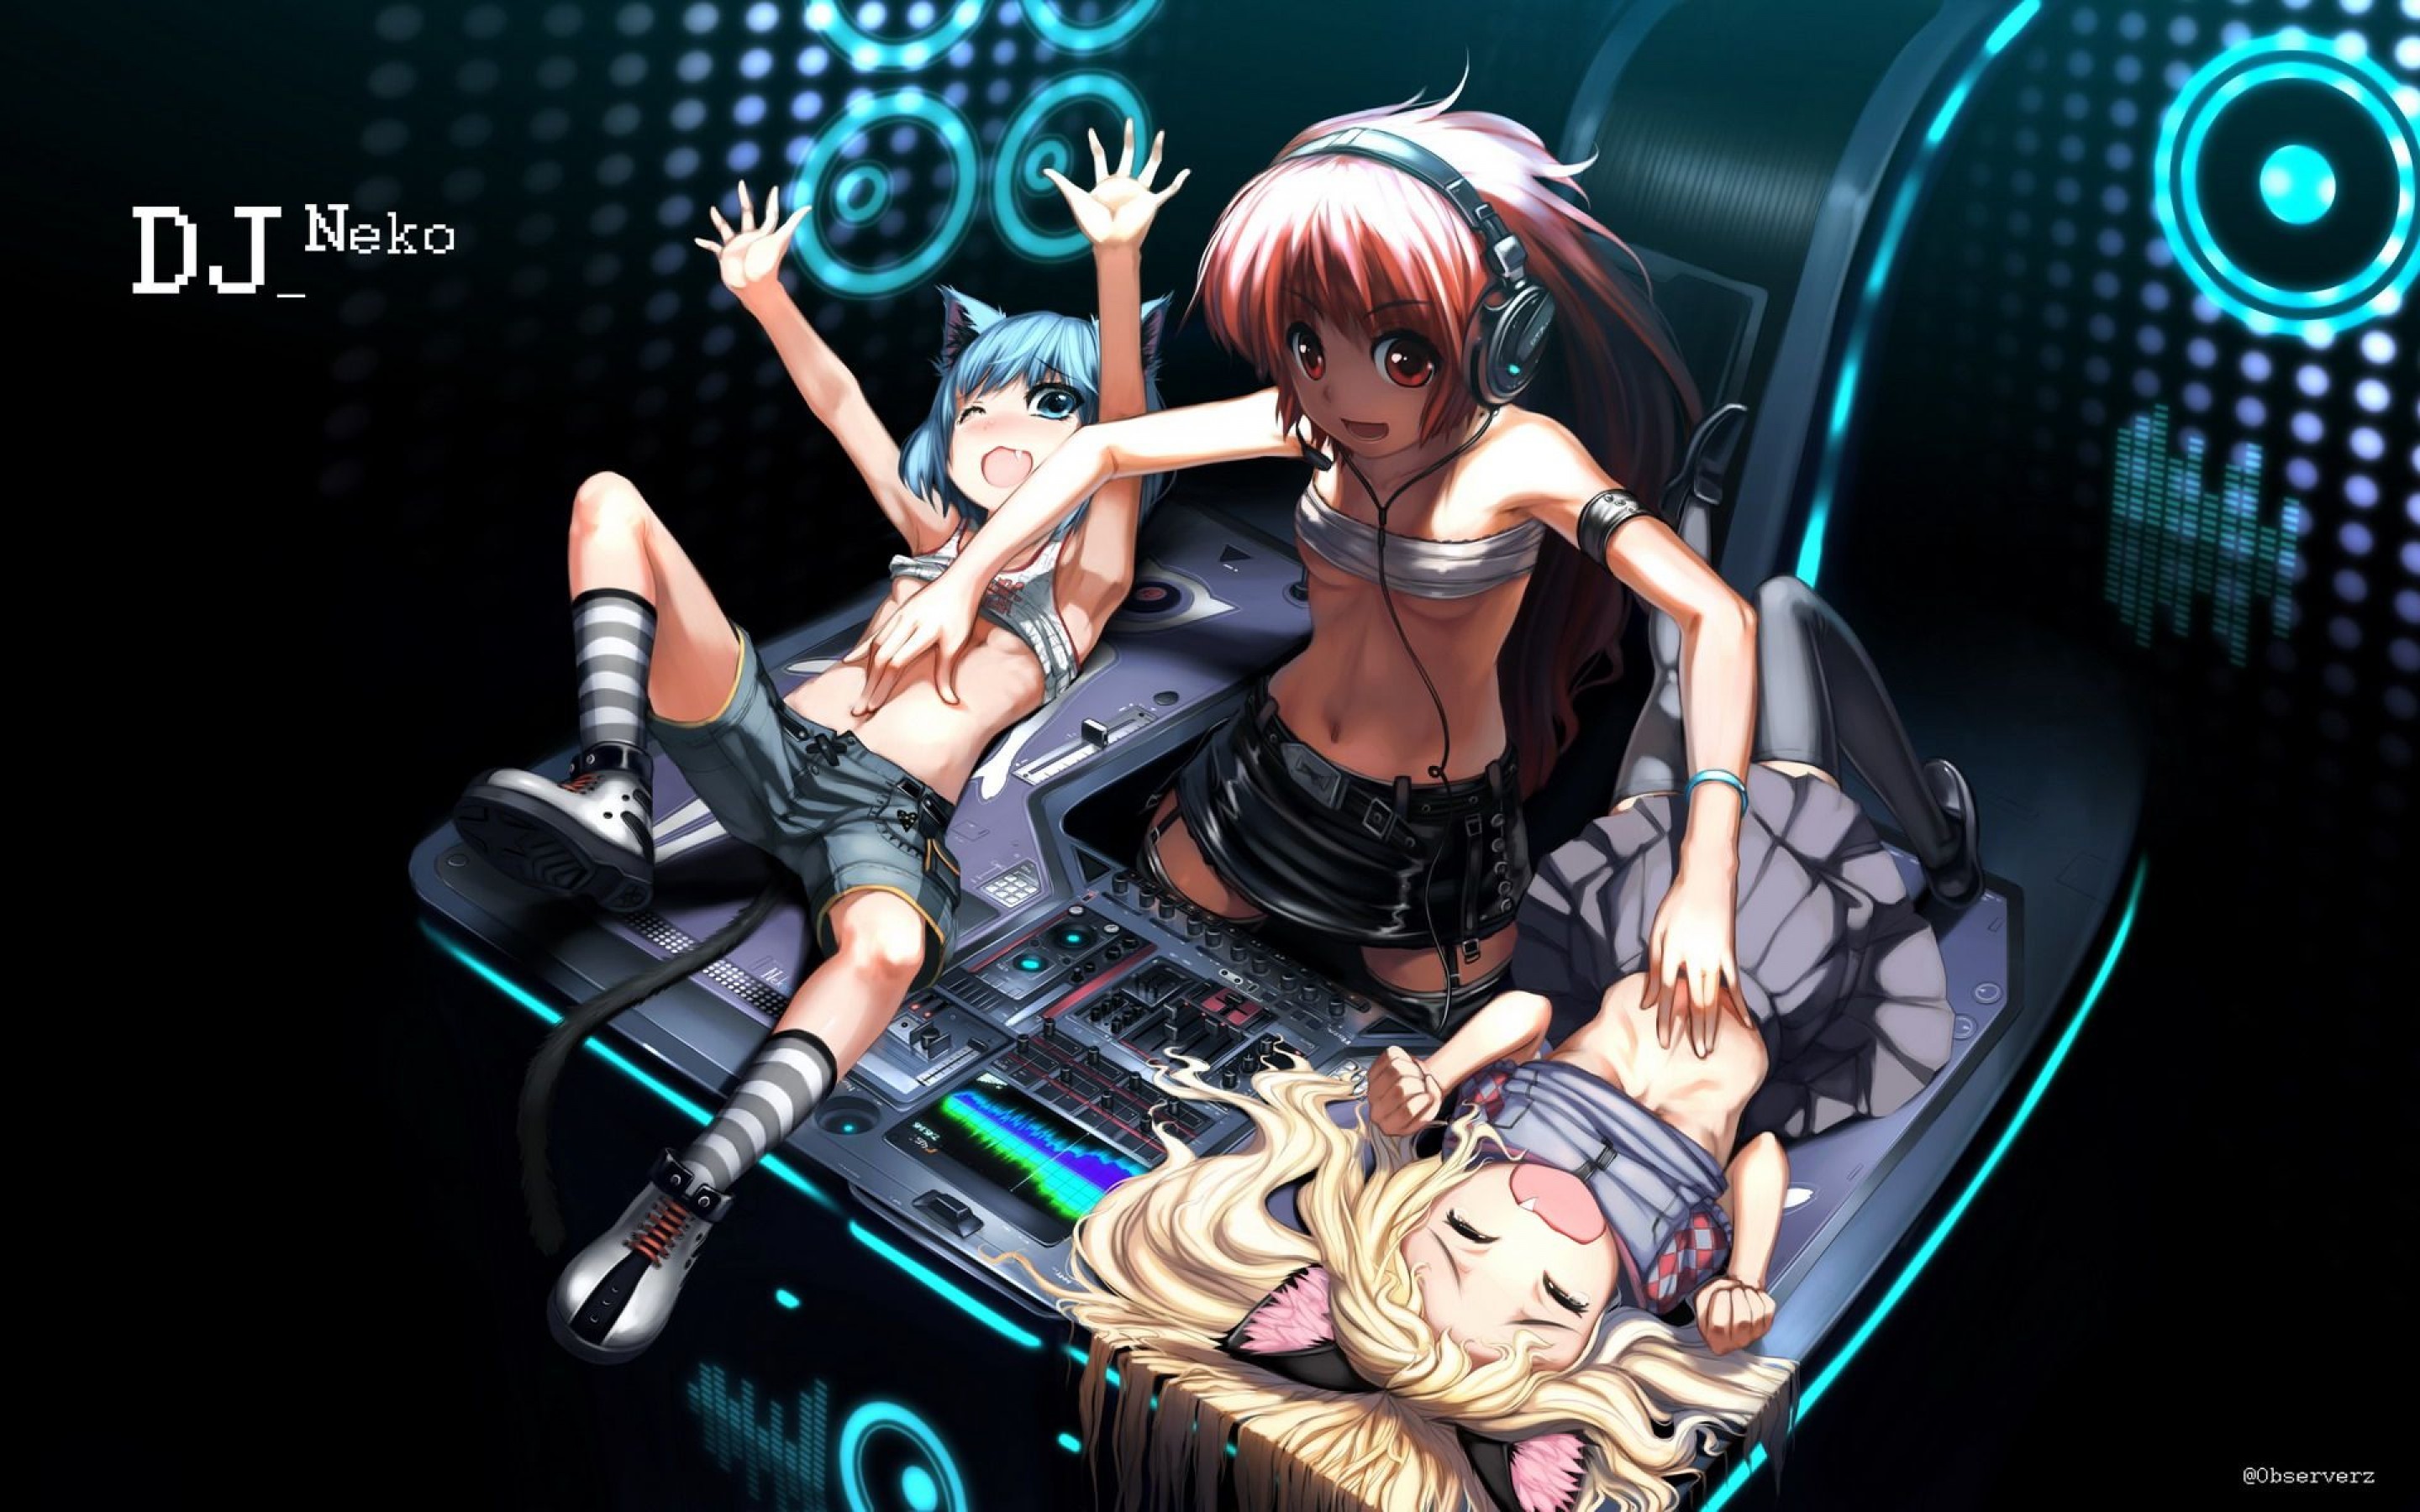 2880x1800 Showing Spin Me Round at resolution , Spin Me Round anime girls wallpaper,  cool anime style girls playing on a mixer drawing desktop music wallpapers